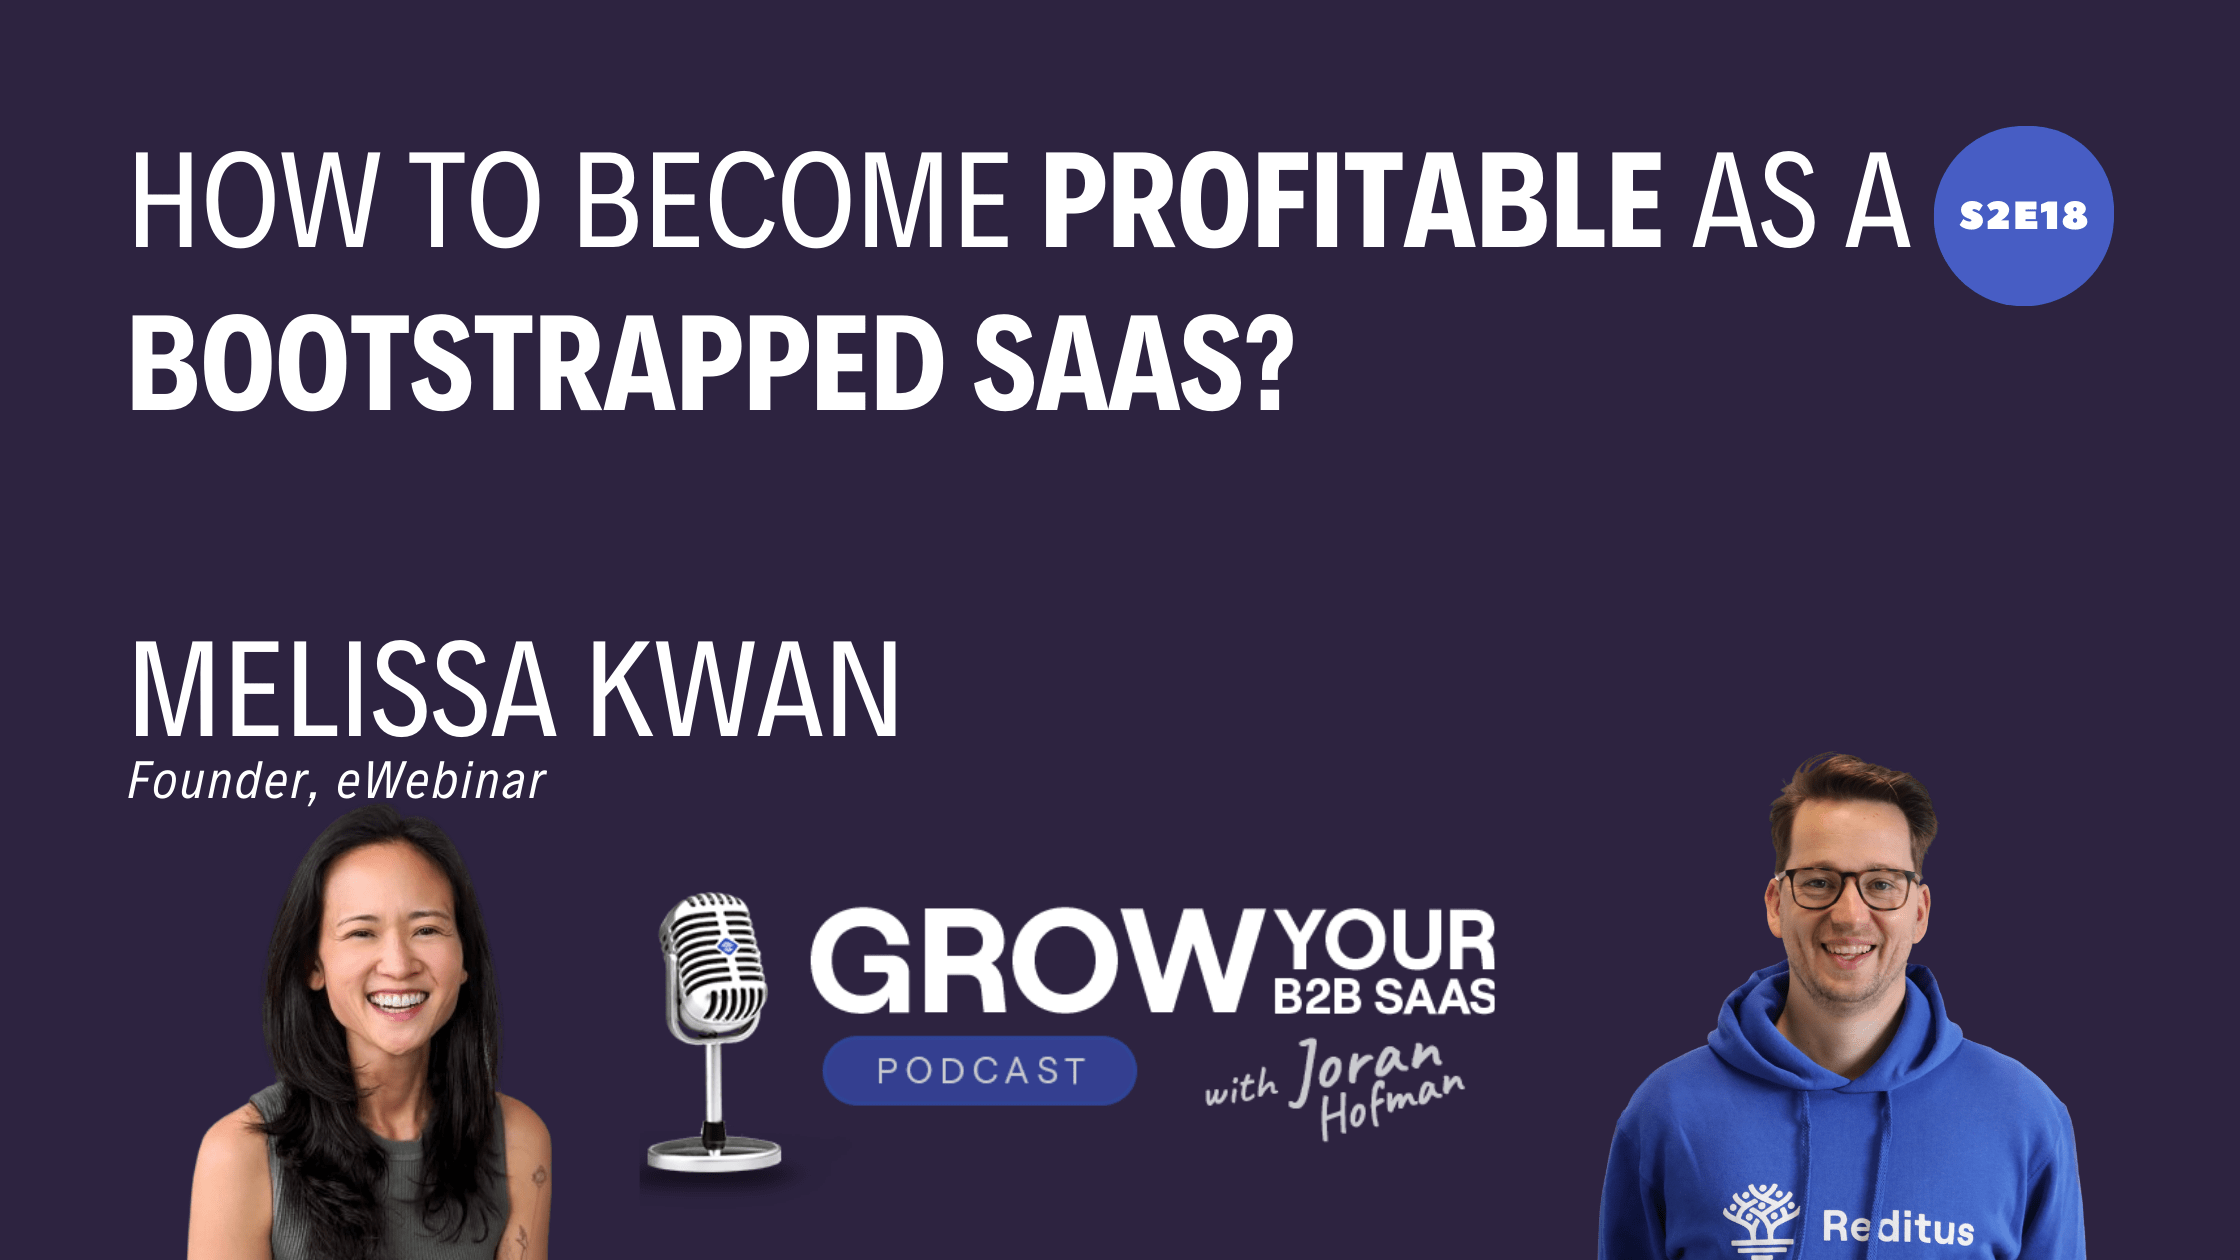 S2E18 – How to become profitable as a bootstrapped SaaS? With Melissa Kwan